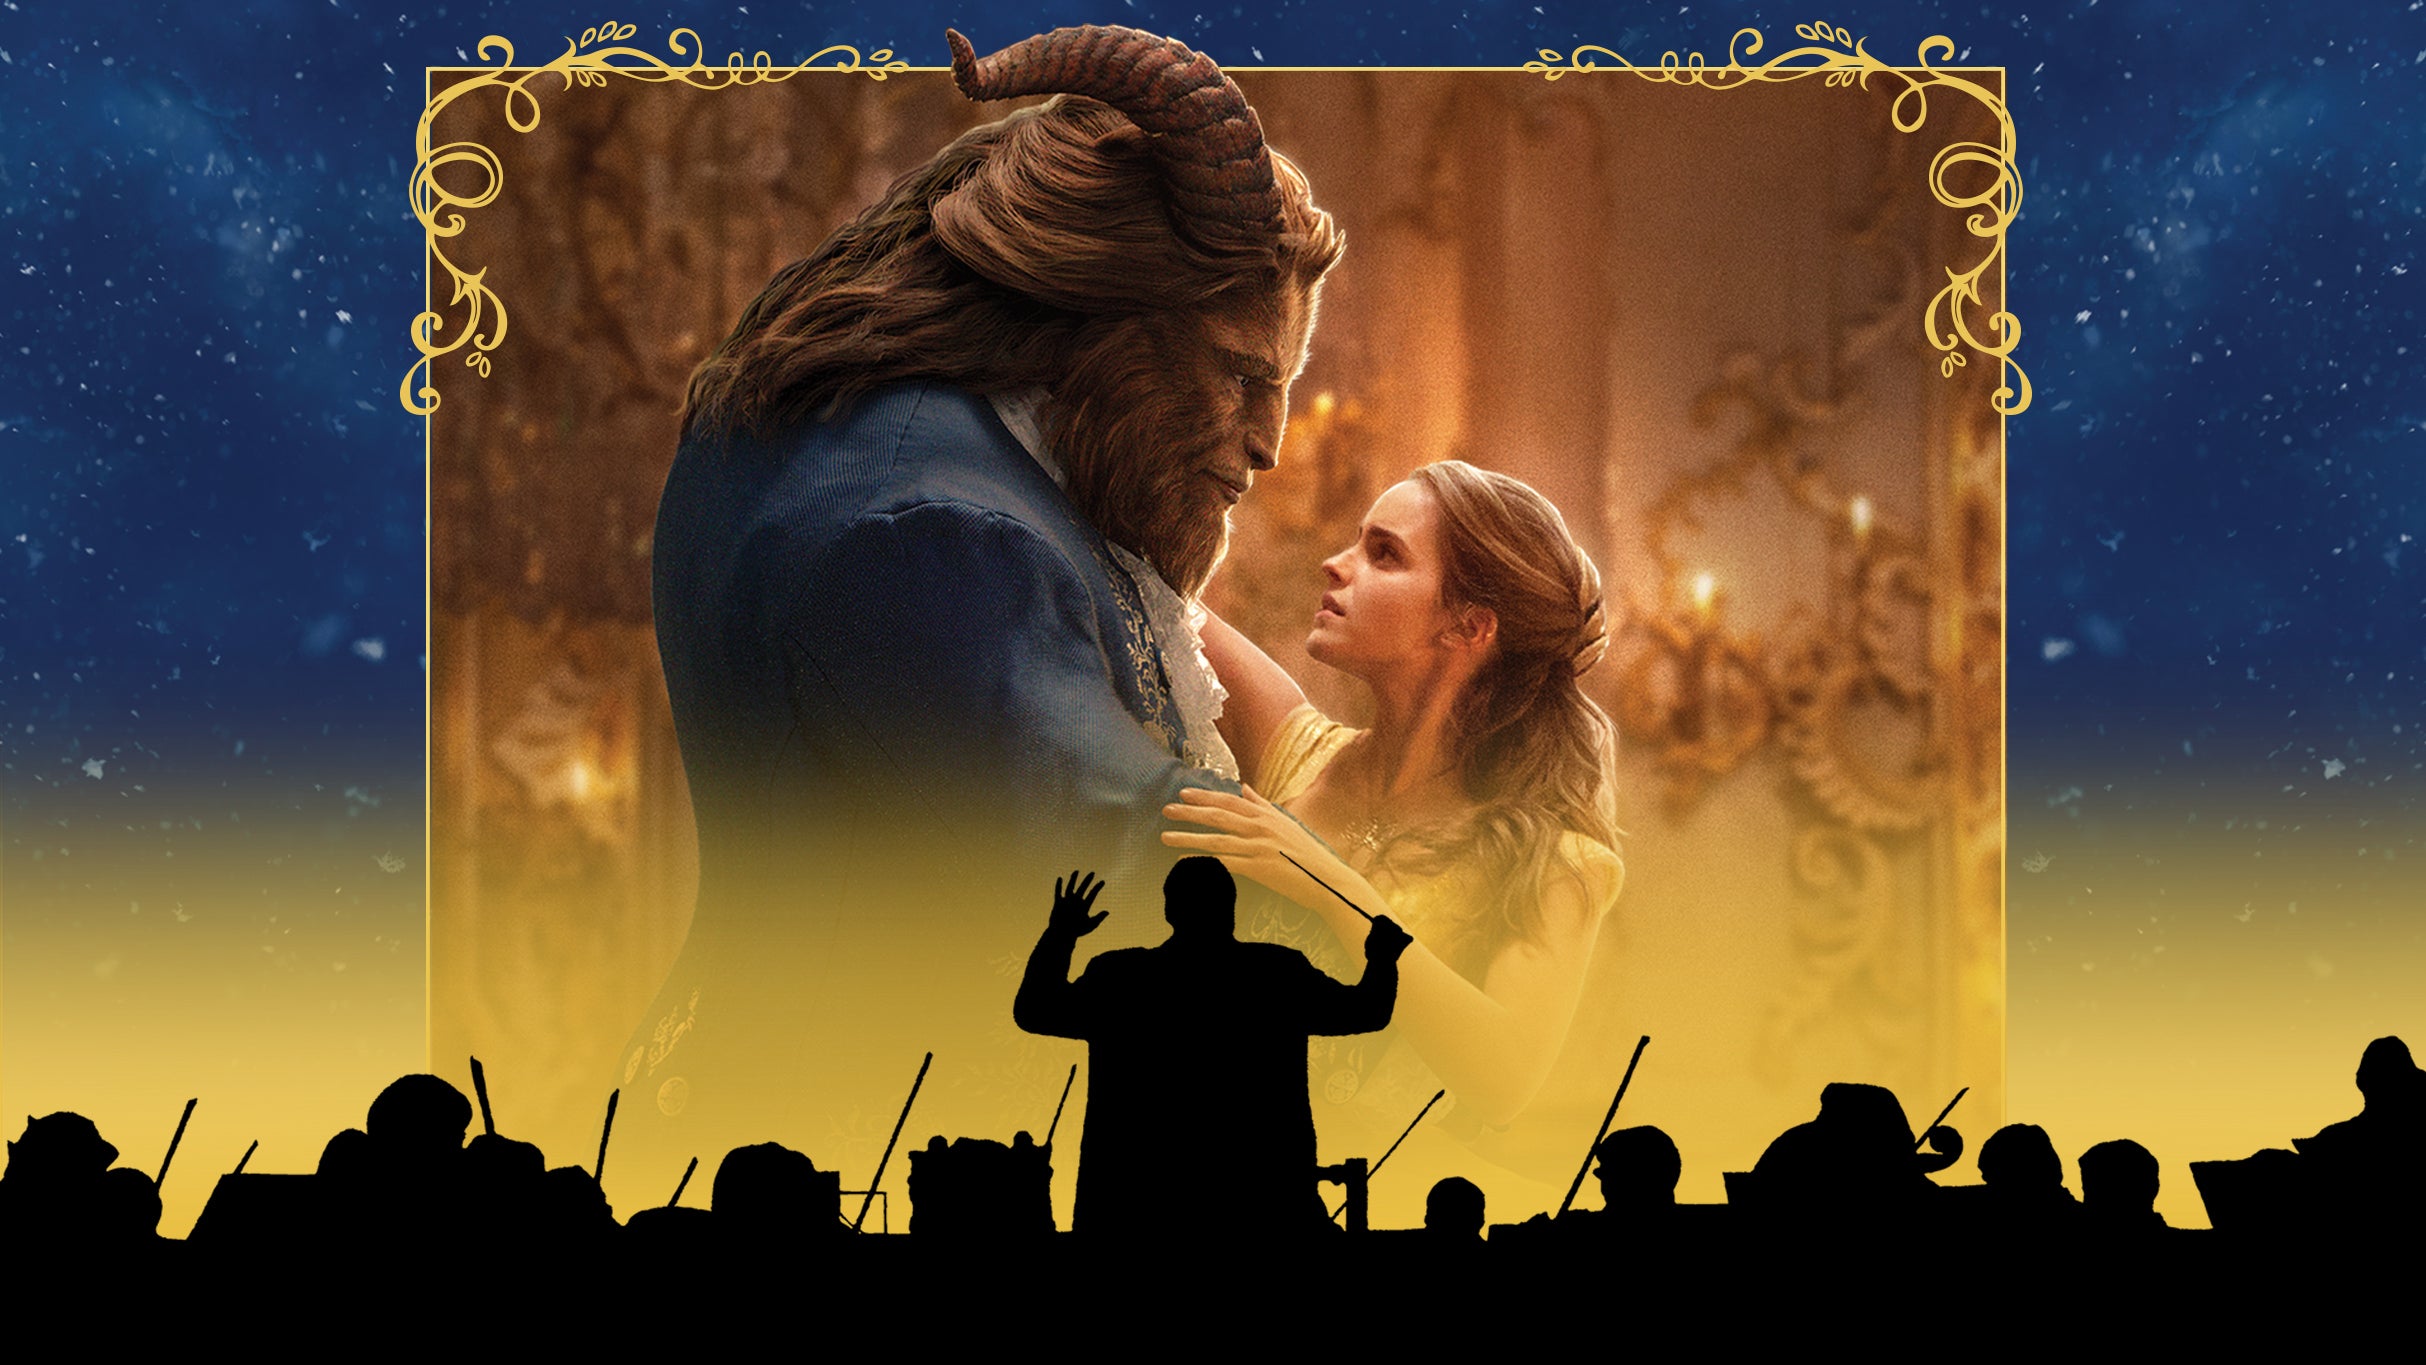 Disney In Concert:Beauty and the Beast Film with Live Orchestra in London promo photo for Ticketmaster presale offer code